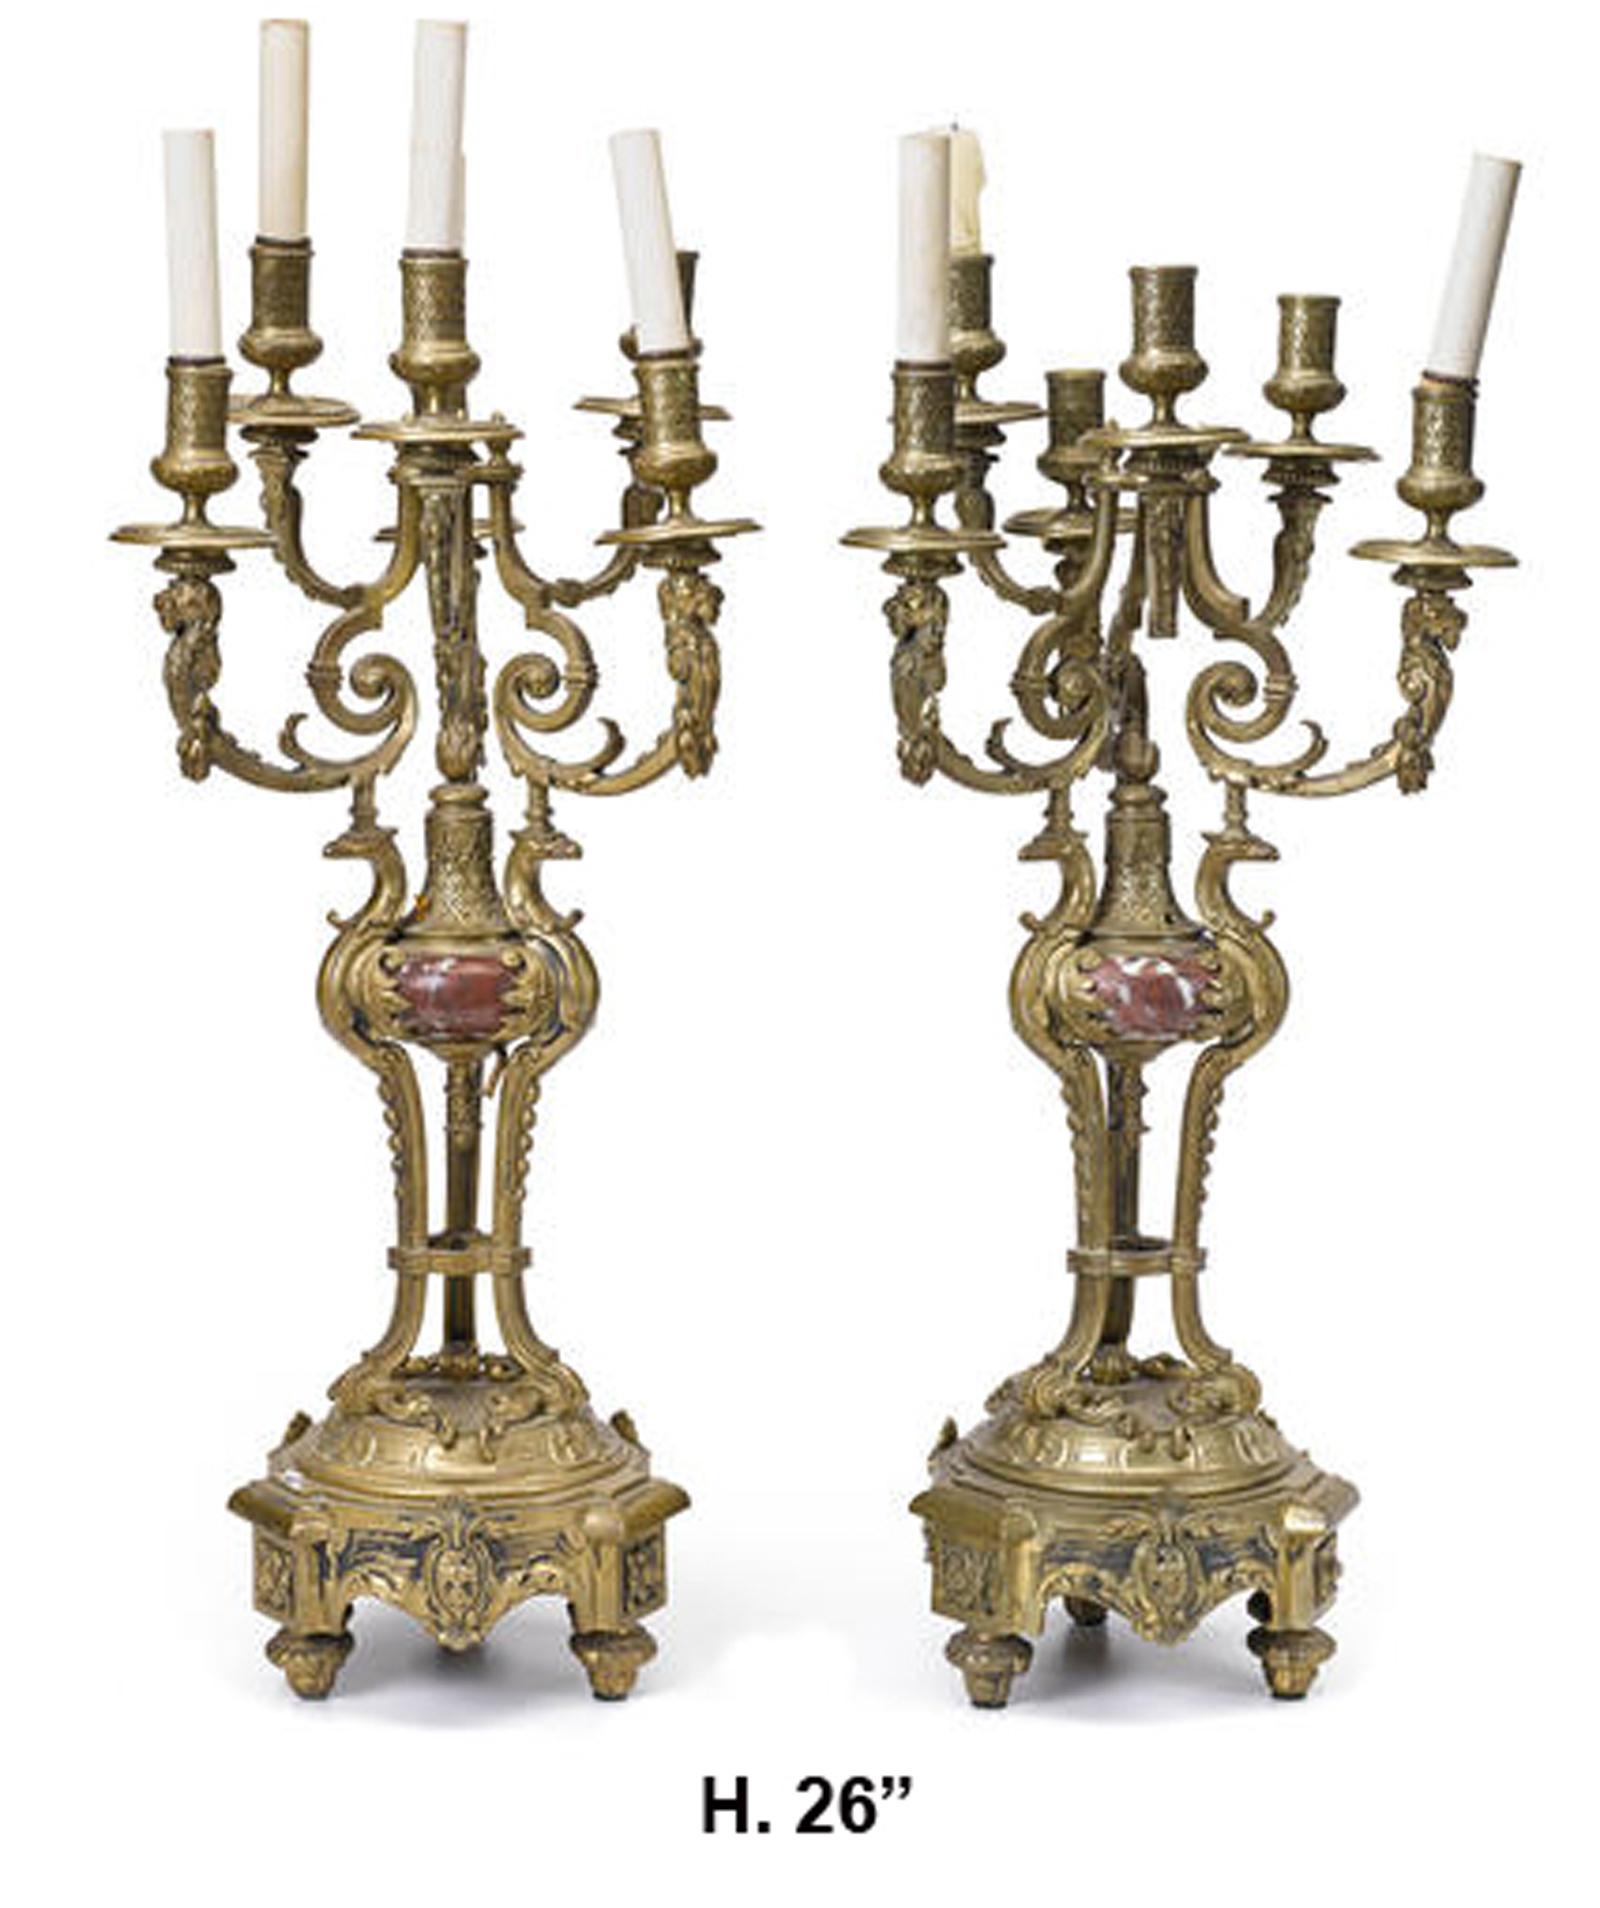 Impressive pair of French Louis XV style gilt bronze and rouge marble six light candelabra,
19th century.

Each candelabra issuing five gilt bronze arms, beginning in scrolling stems and terminating in a dish pan and candleholder, over a tri-form